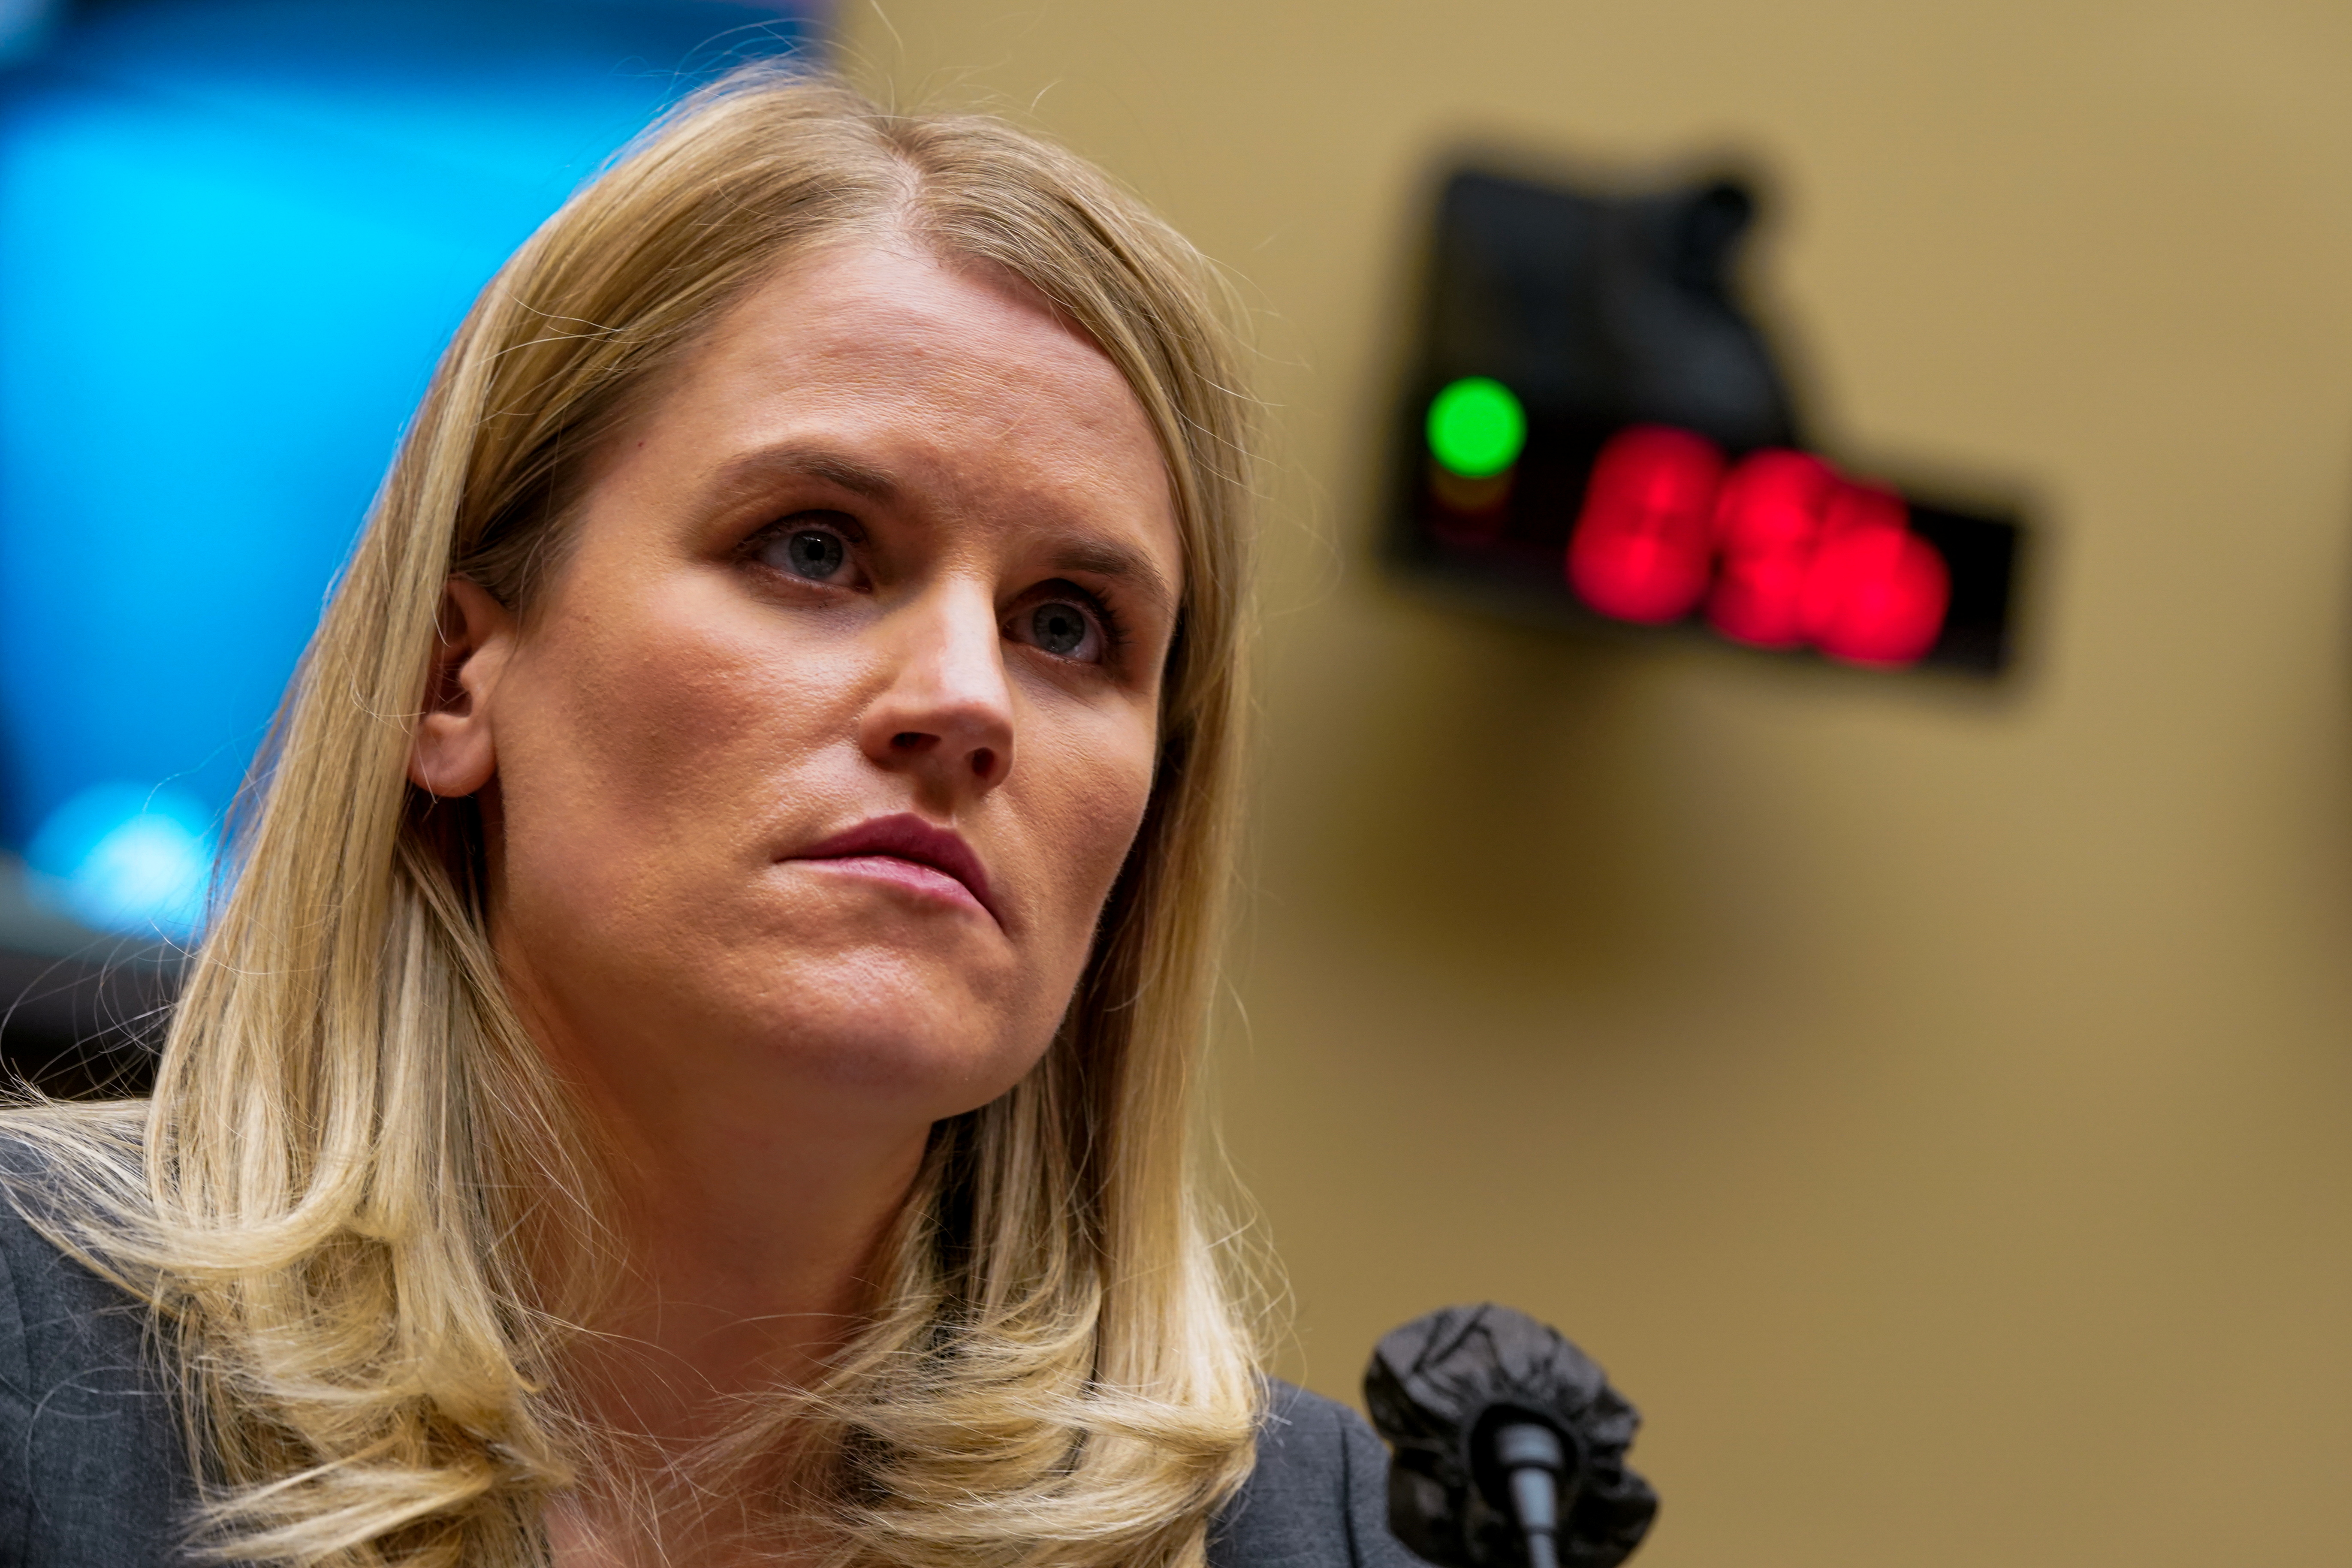 Former Facebook employee and critic Frances Haugen answers questions during a U.S. House Committee on Energy and Commerce Subcommittee on Communications and Technology hearing on Capitol Hill in Washington